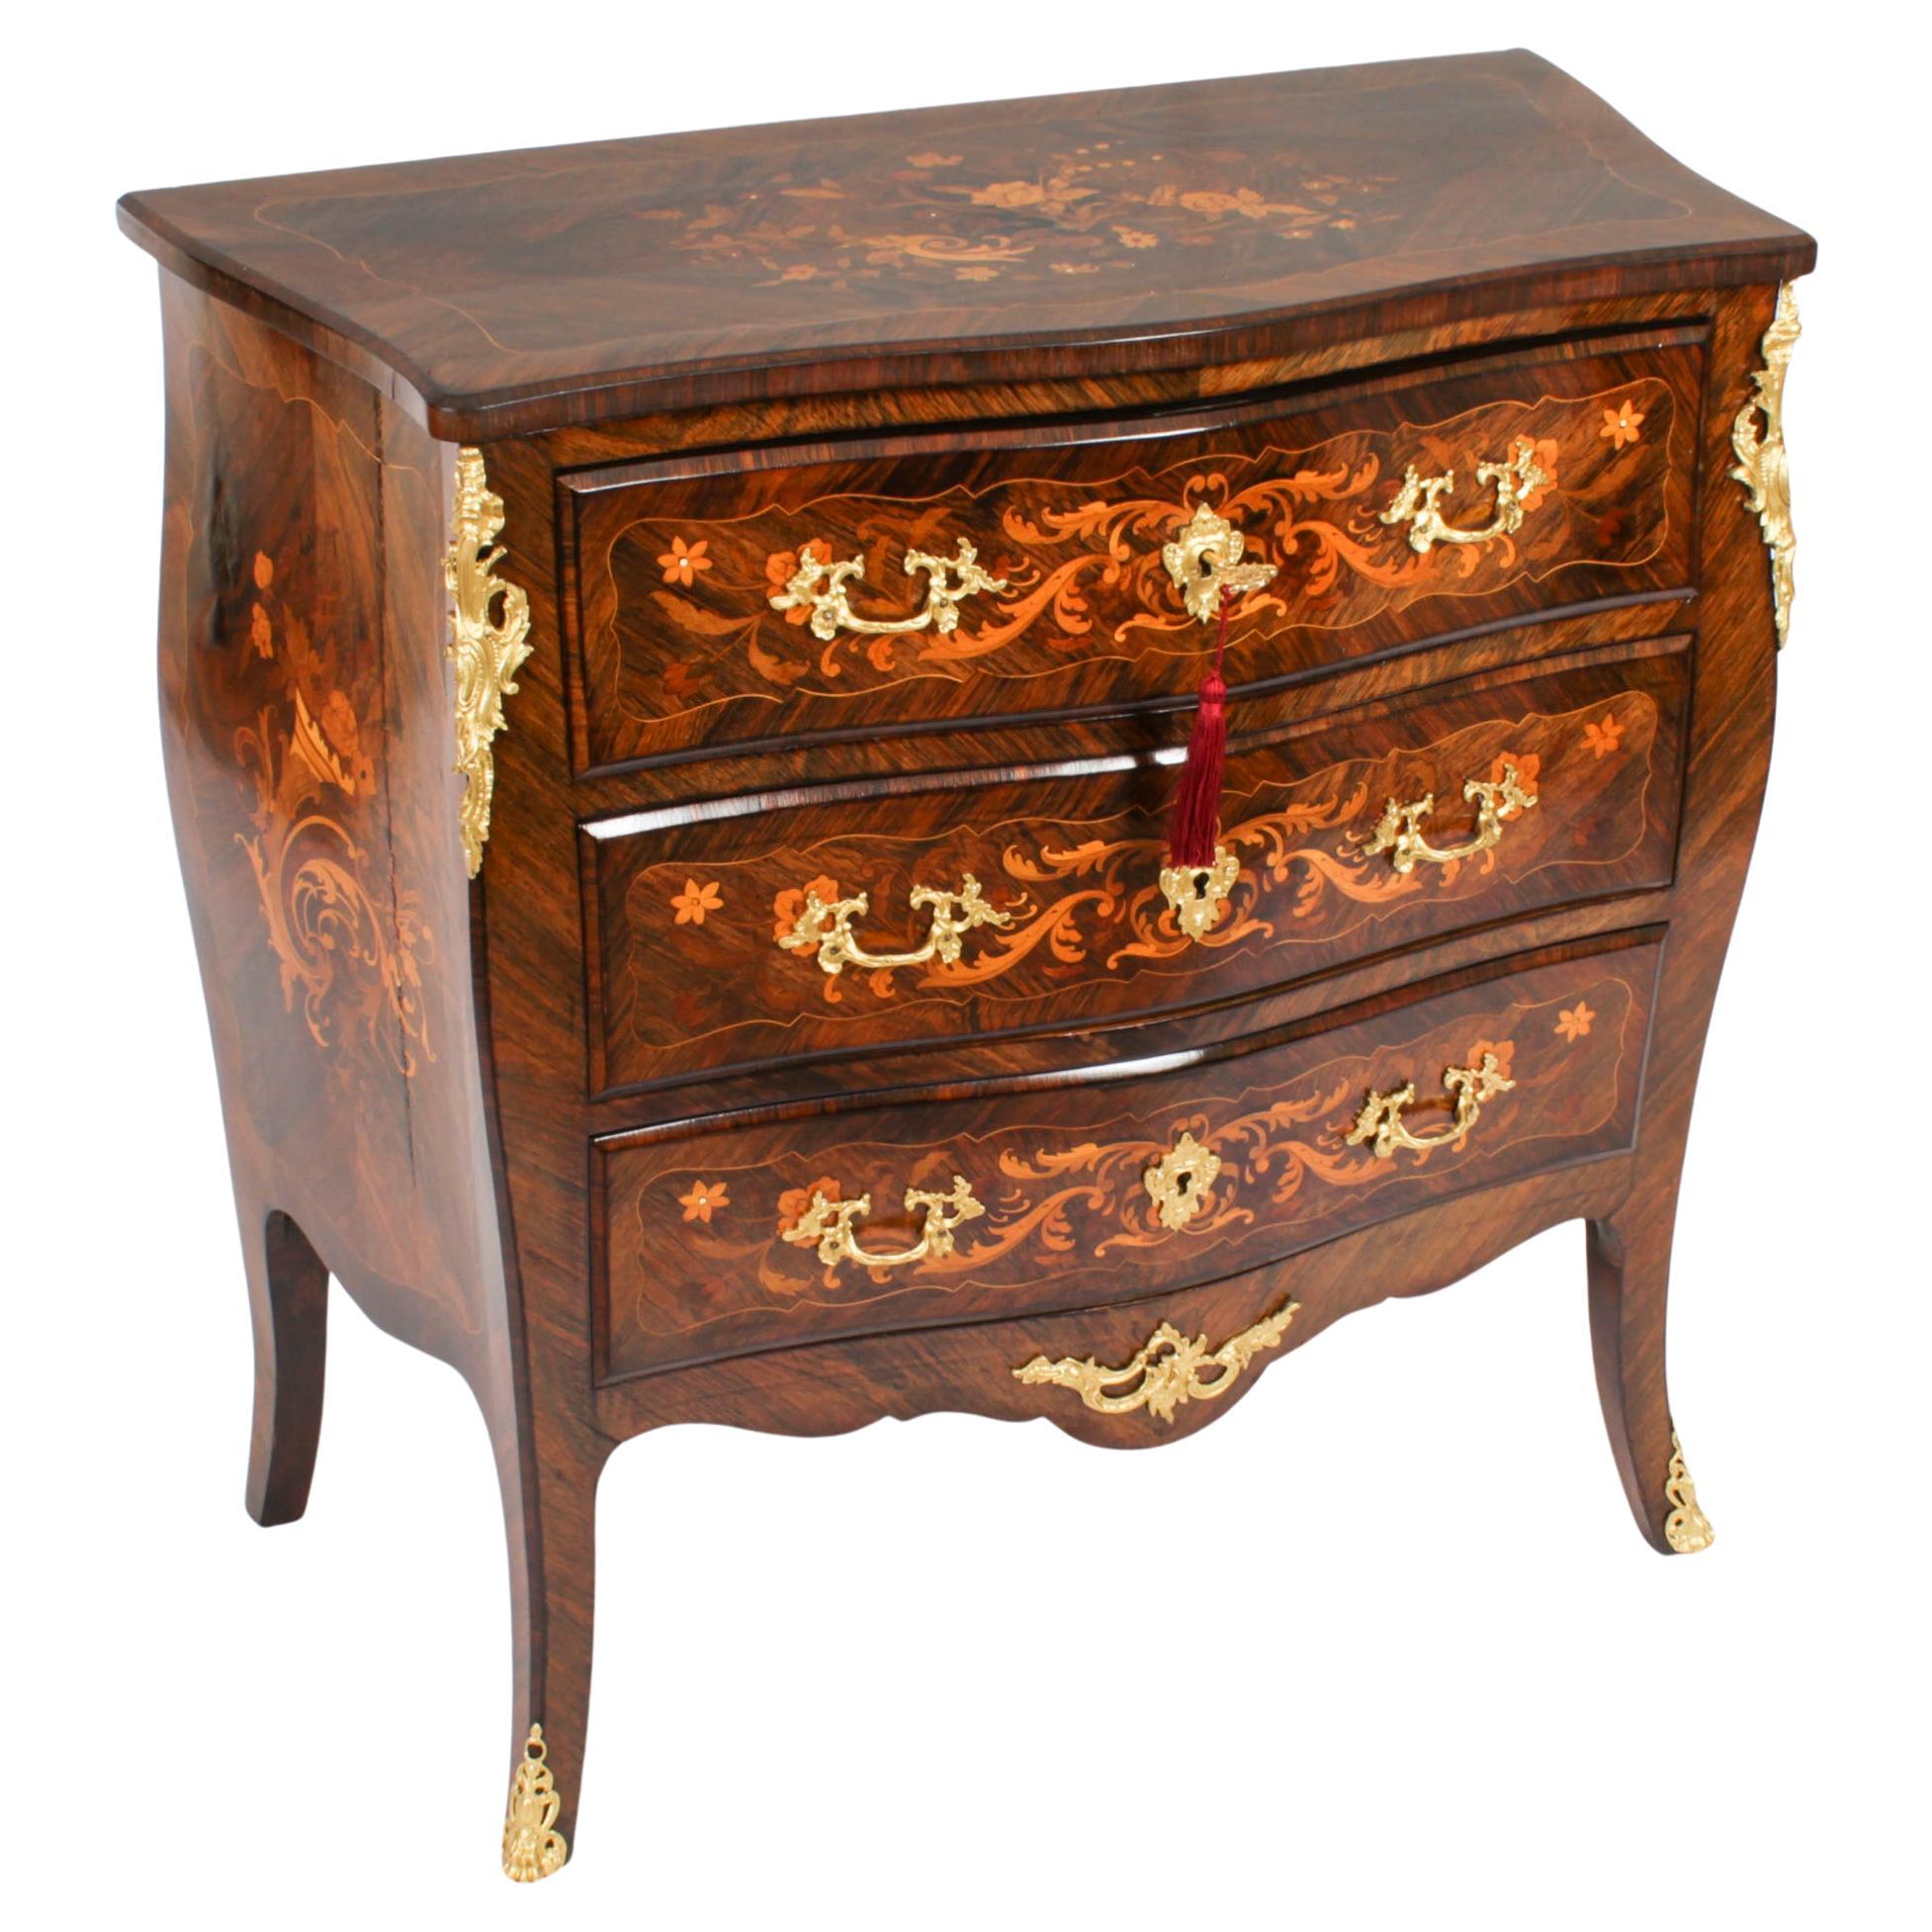 Antique French Louis Revival Marquetry Commode Chest of Drawers 19th Century For Sale